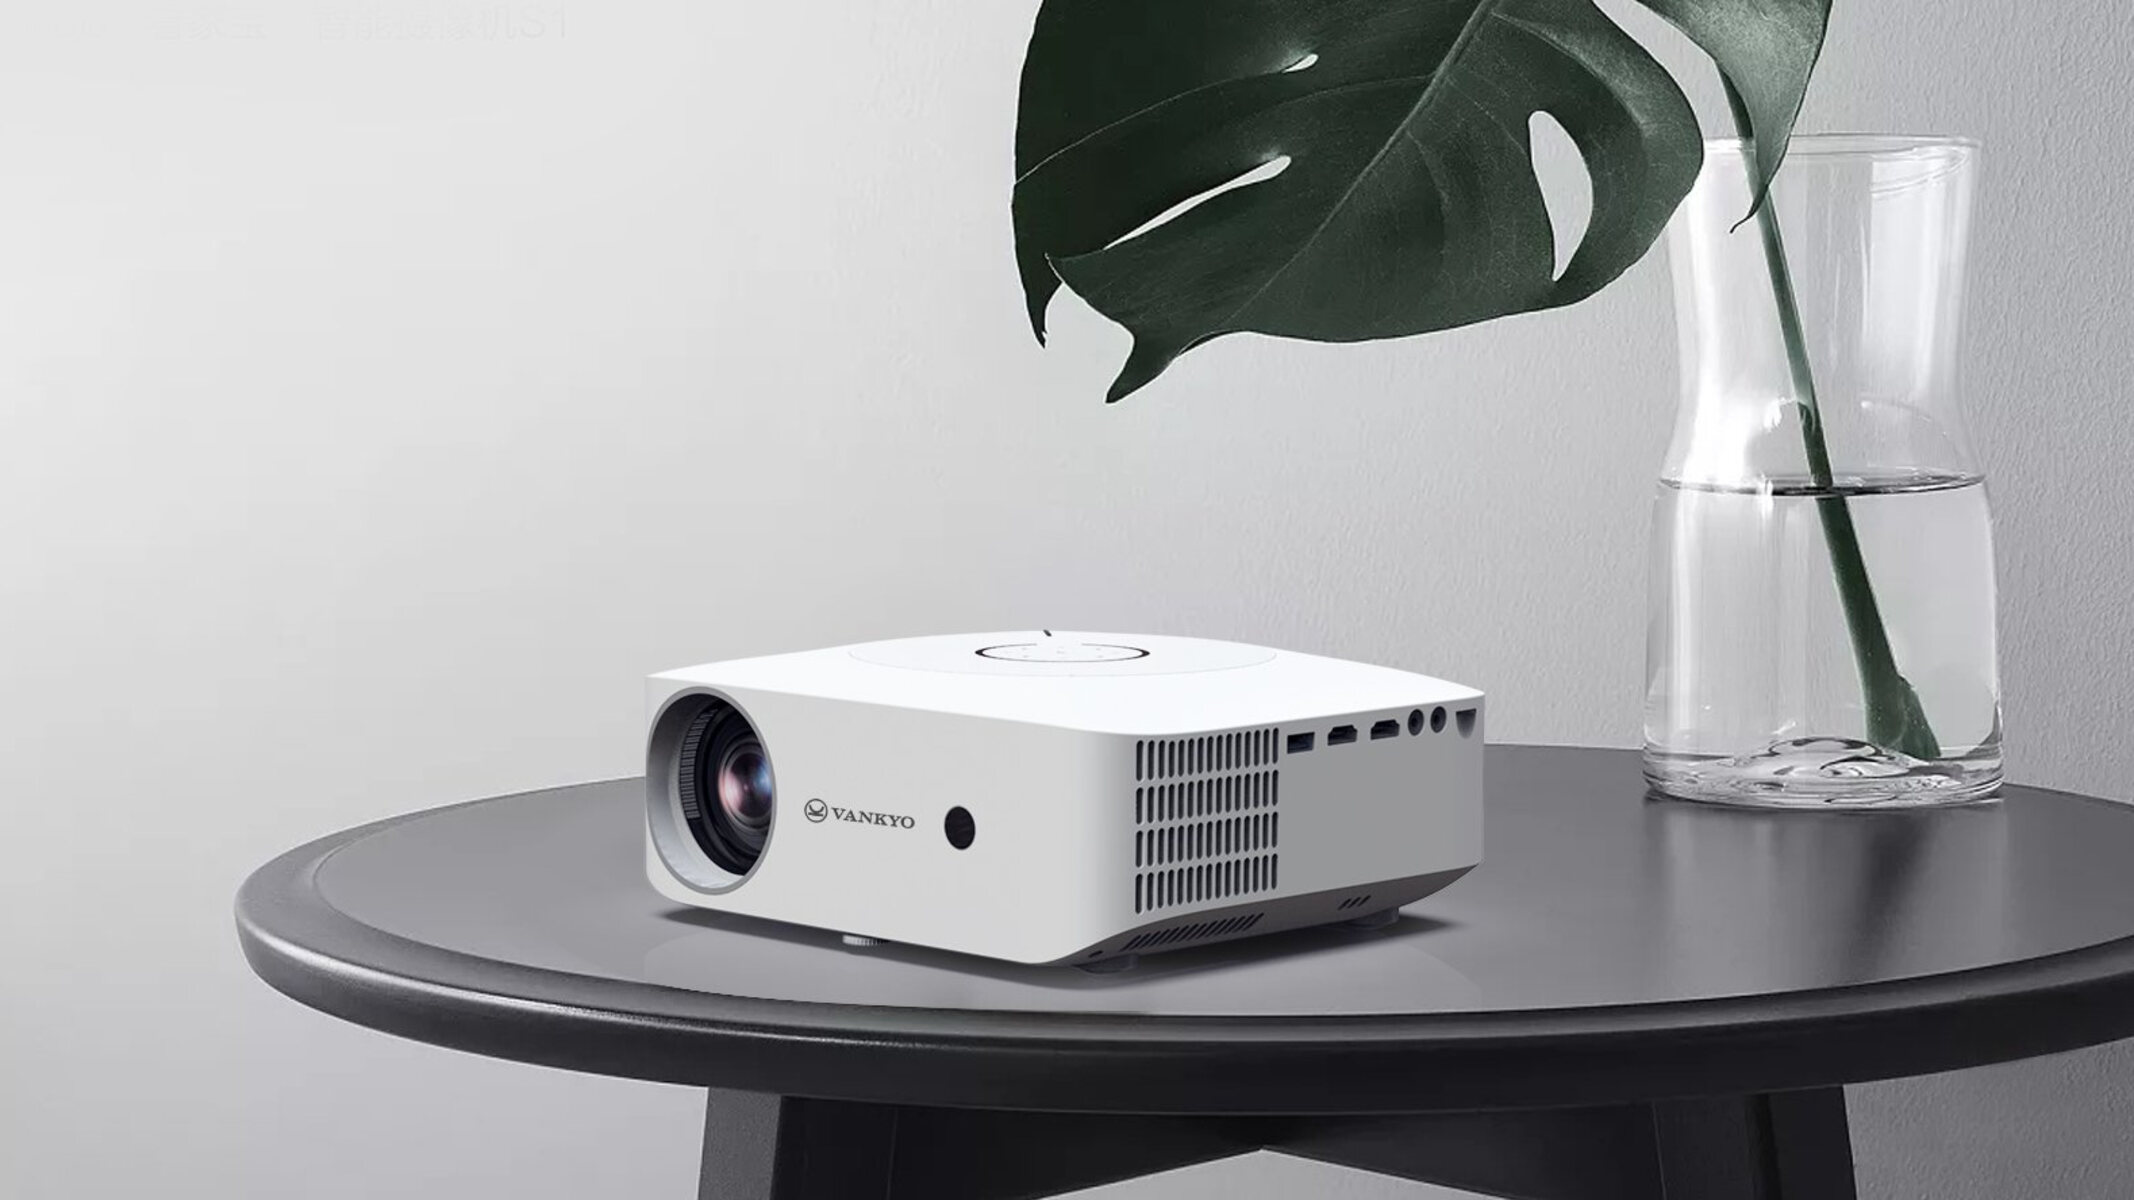 How To Turn Volume Down On Vankyo Projector